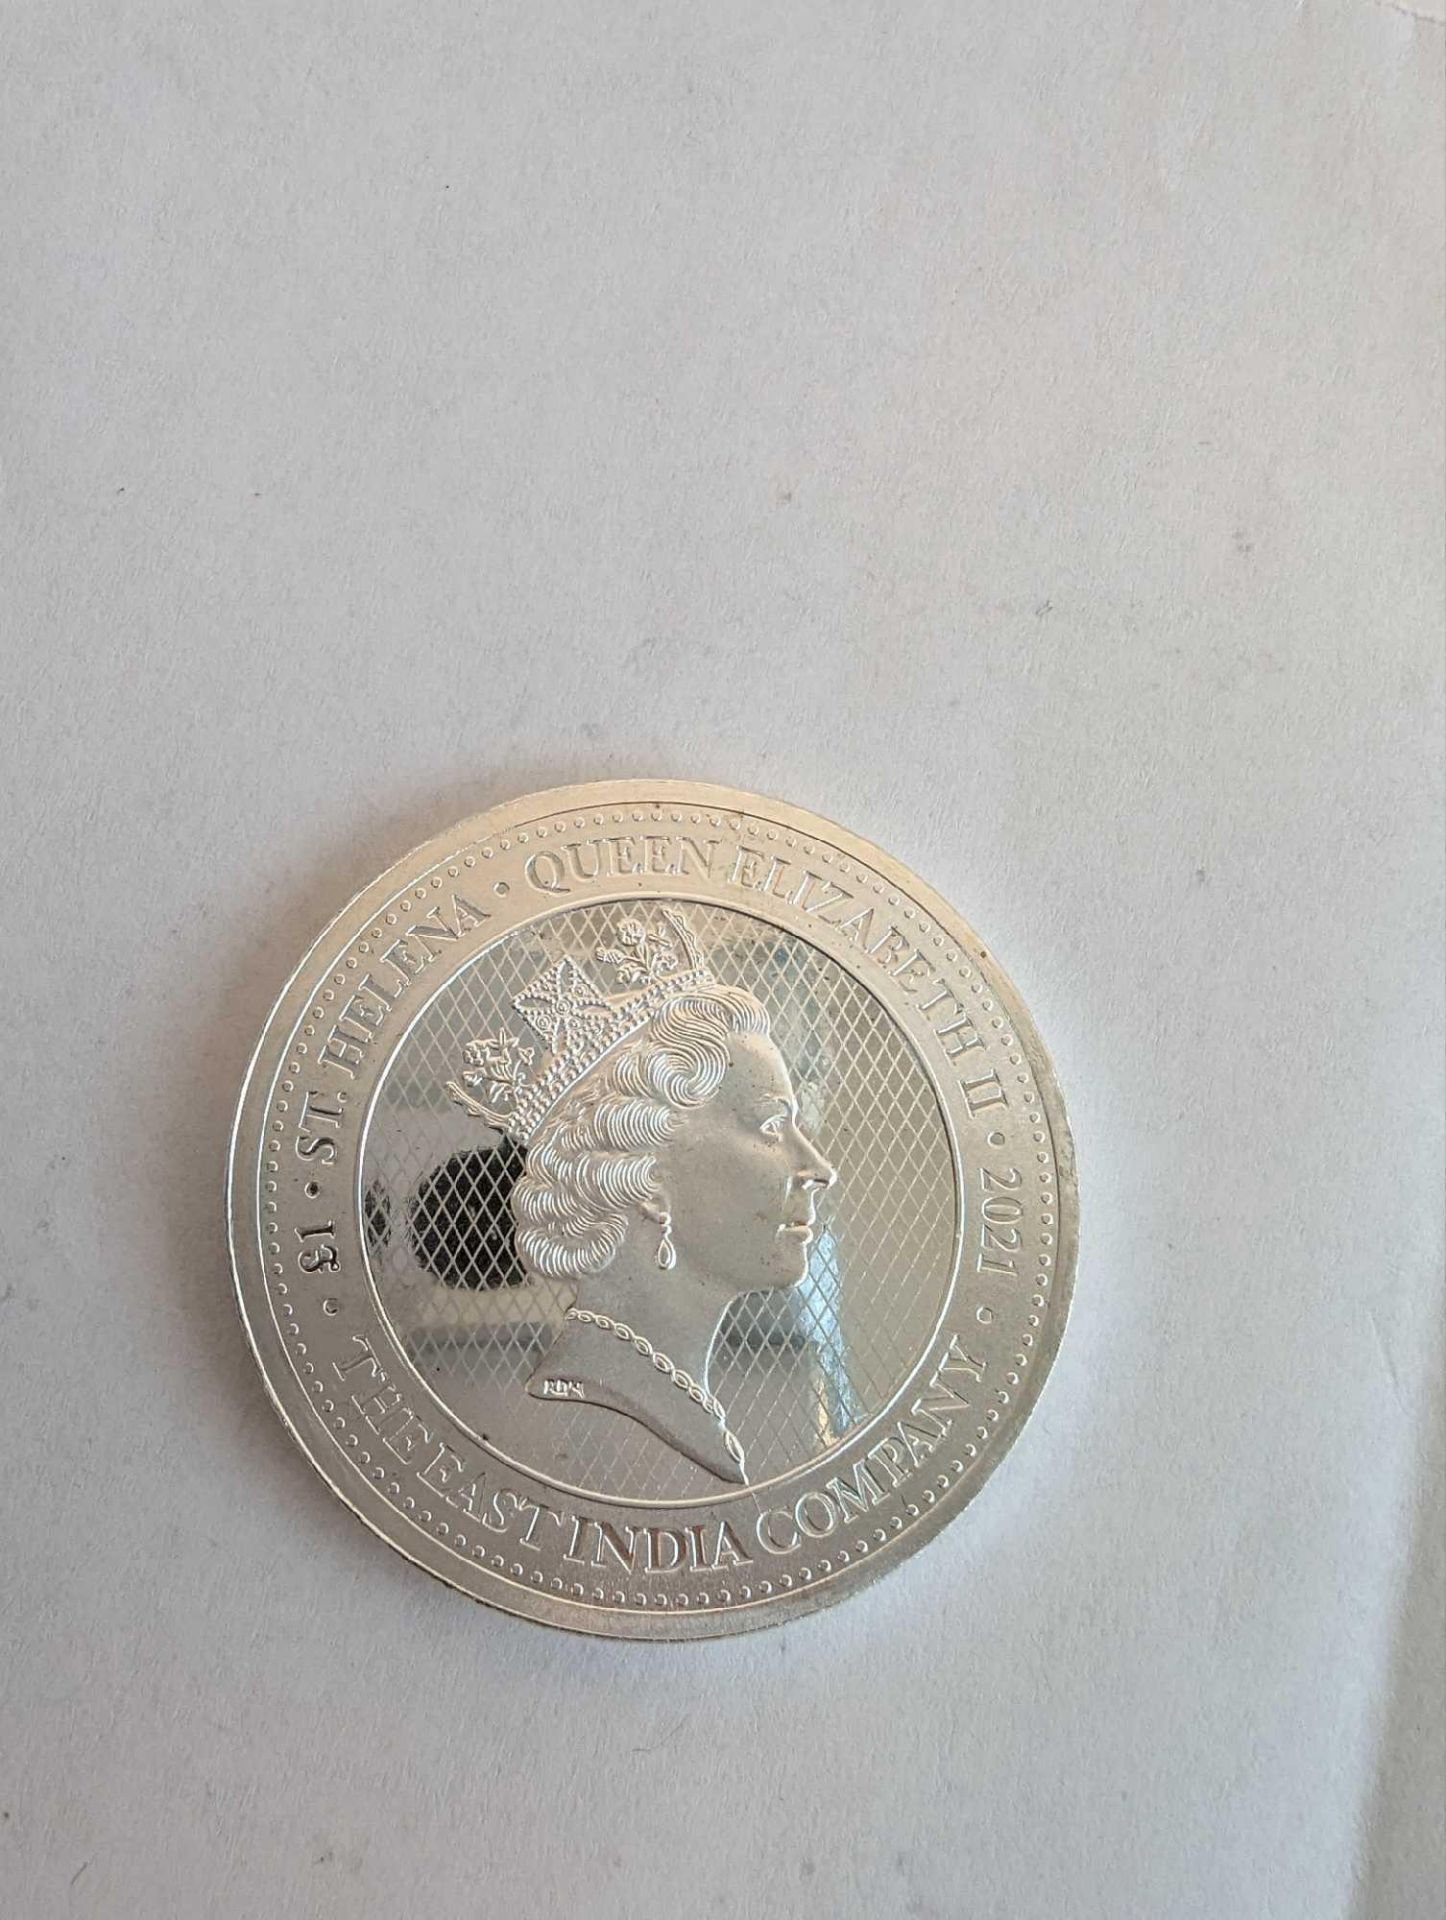 2021 st Helena angel silver coin